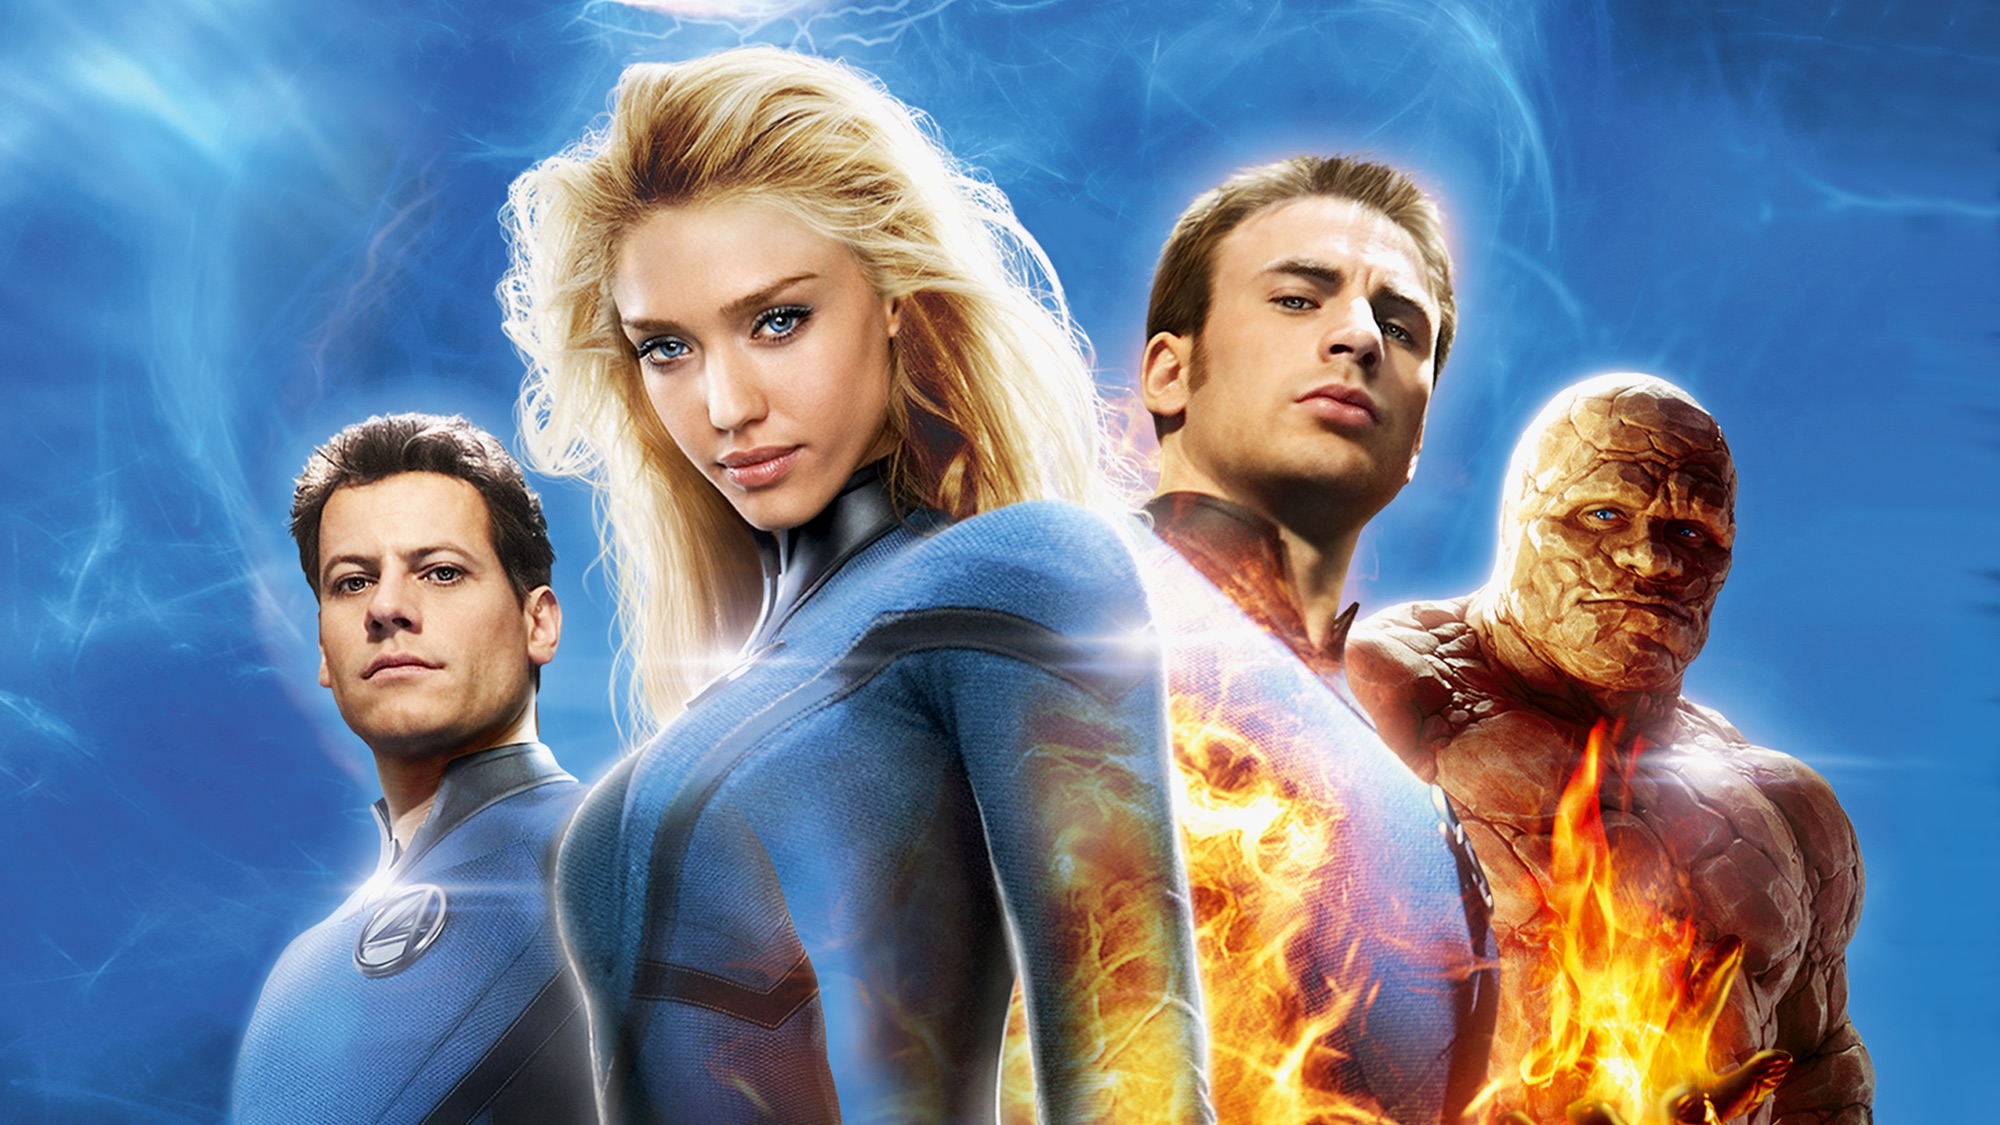 movie, fantastic 4: rise of the silver surfer, chris evans, human torch (marvel comics), invisible woman, ioan gruffudd, jessica alba, johnny storm, mister fantastic, reed richards, susan storm, thing (marvel comics)